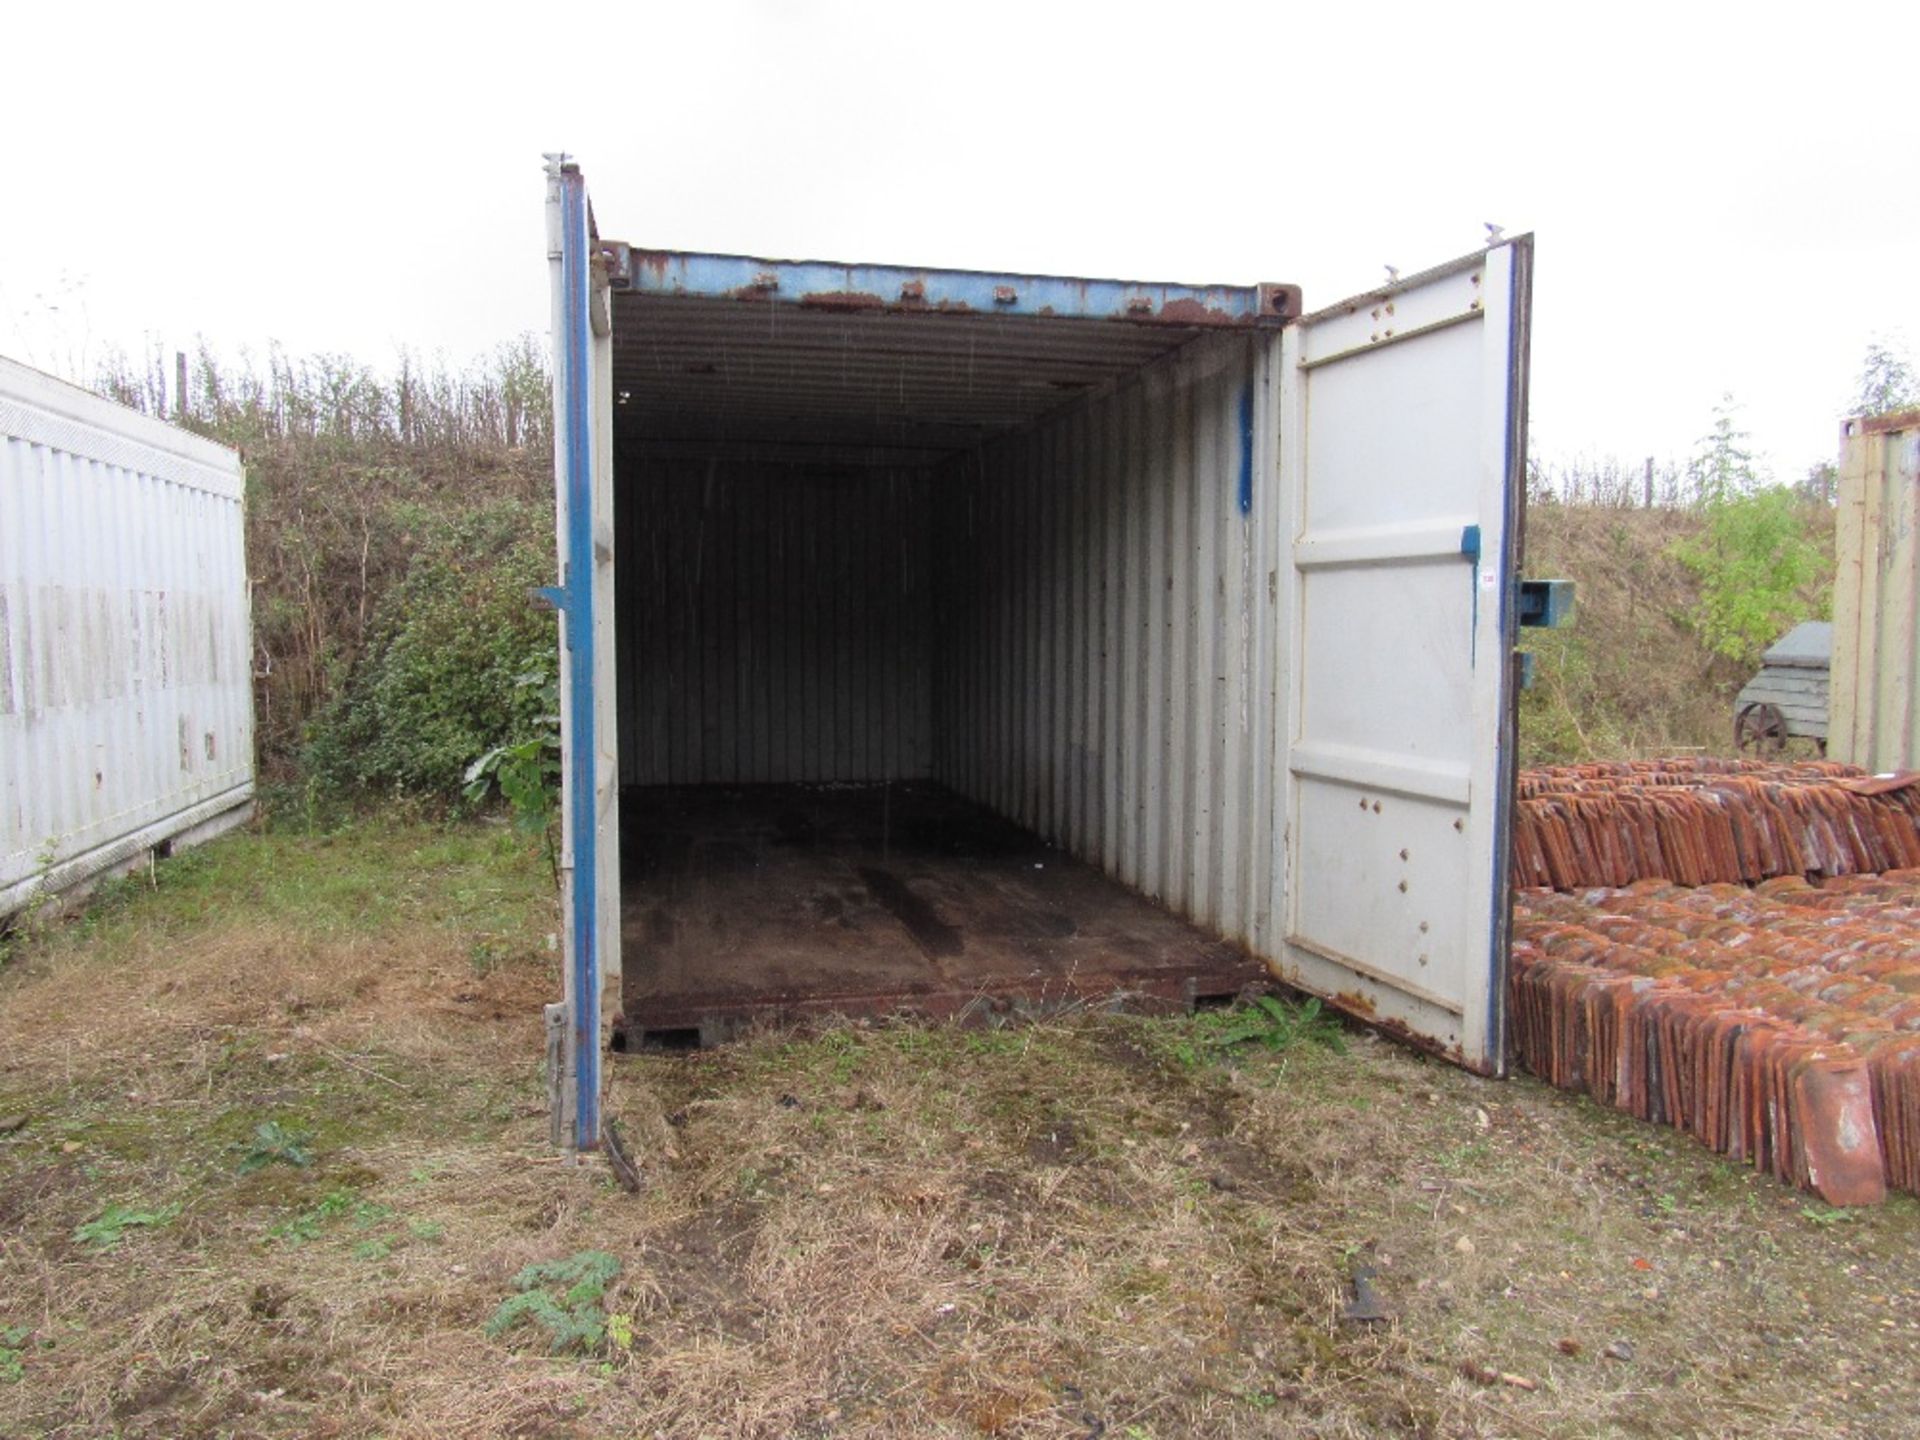 20ft Blue shipping container